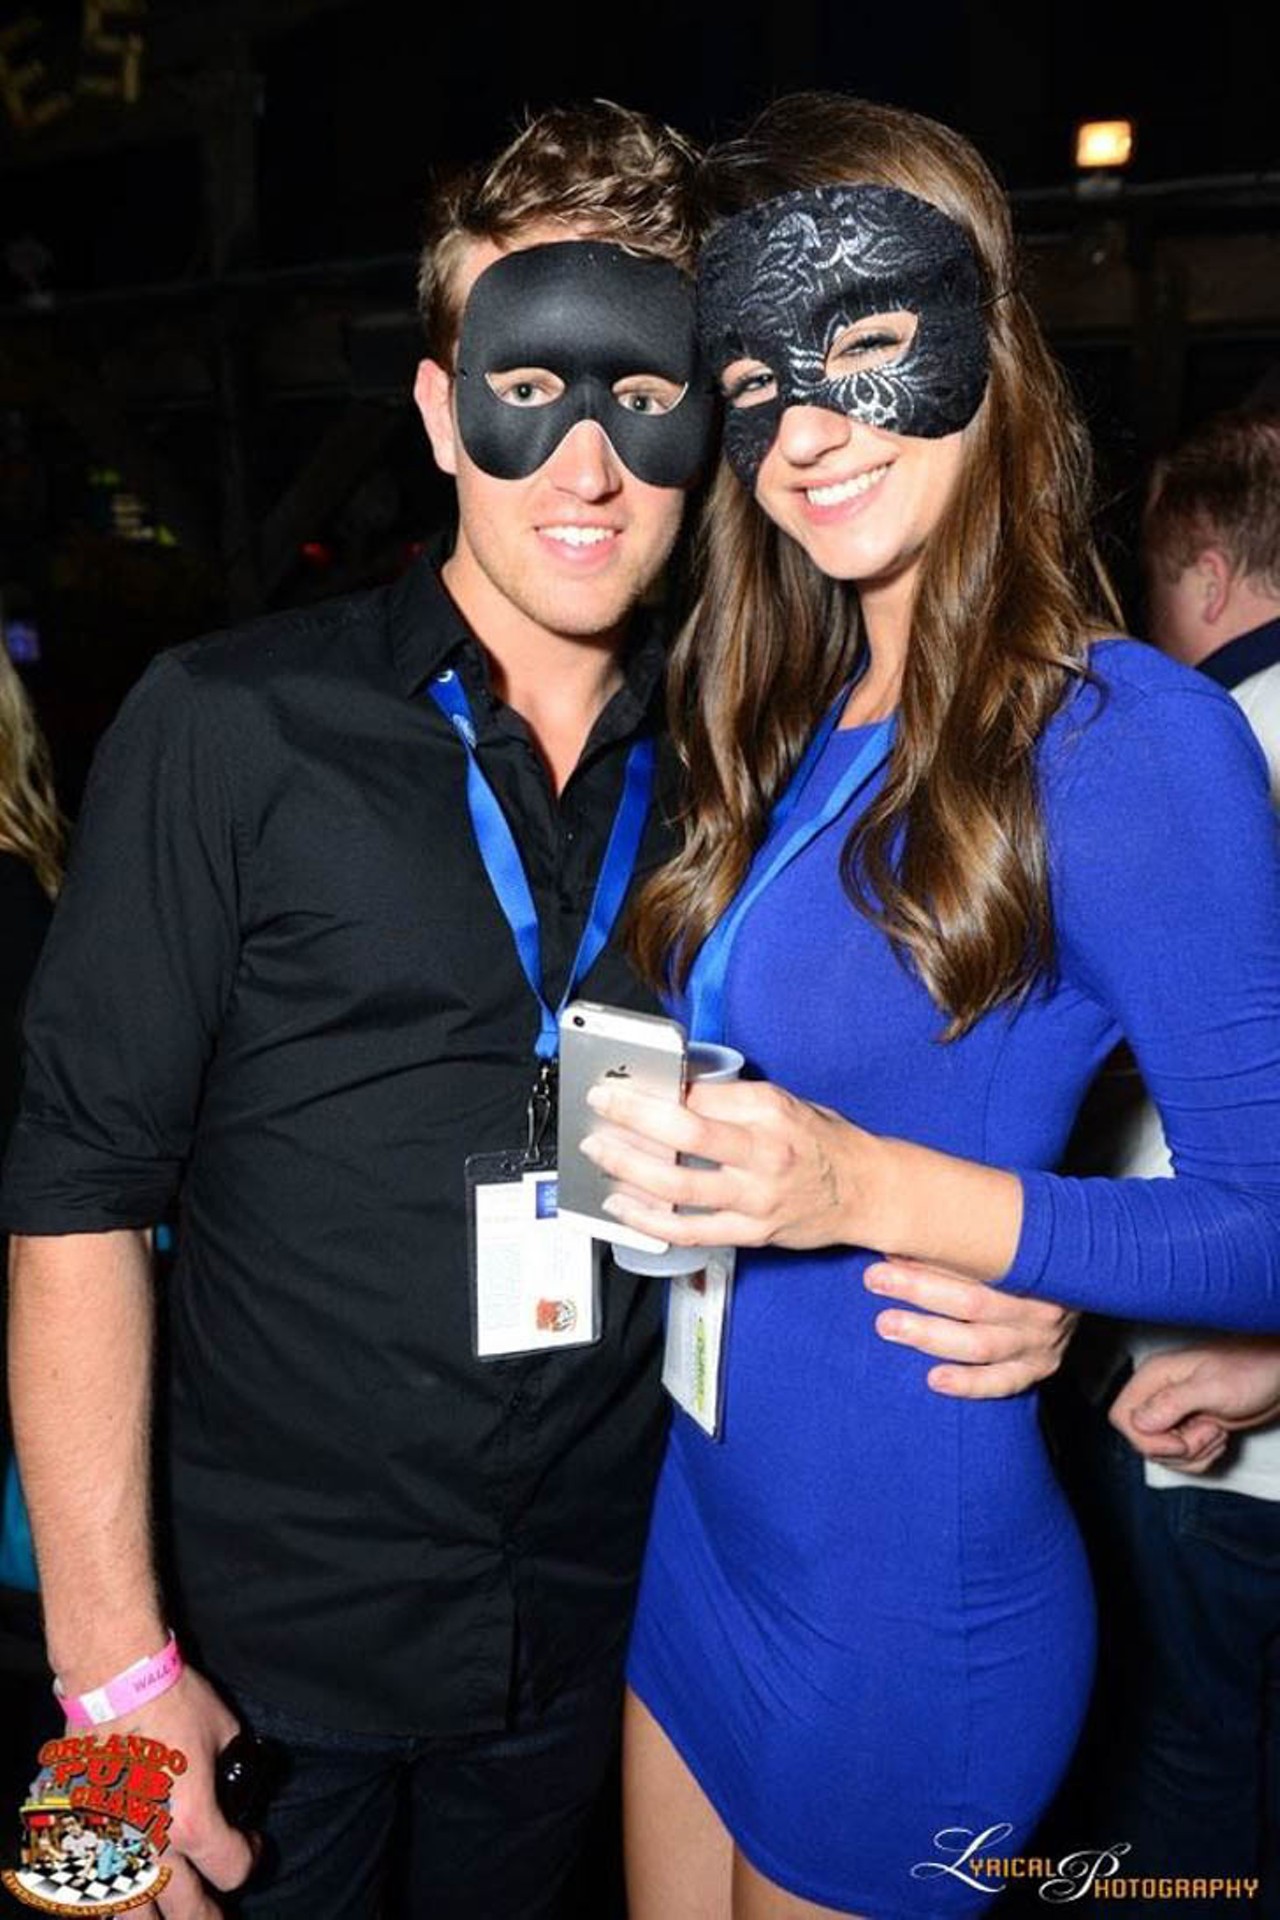 14 photos of what to expect at The Masquerade Crawl